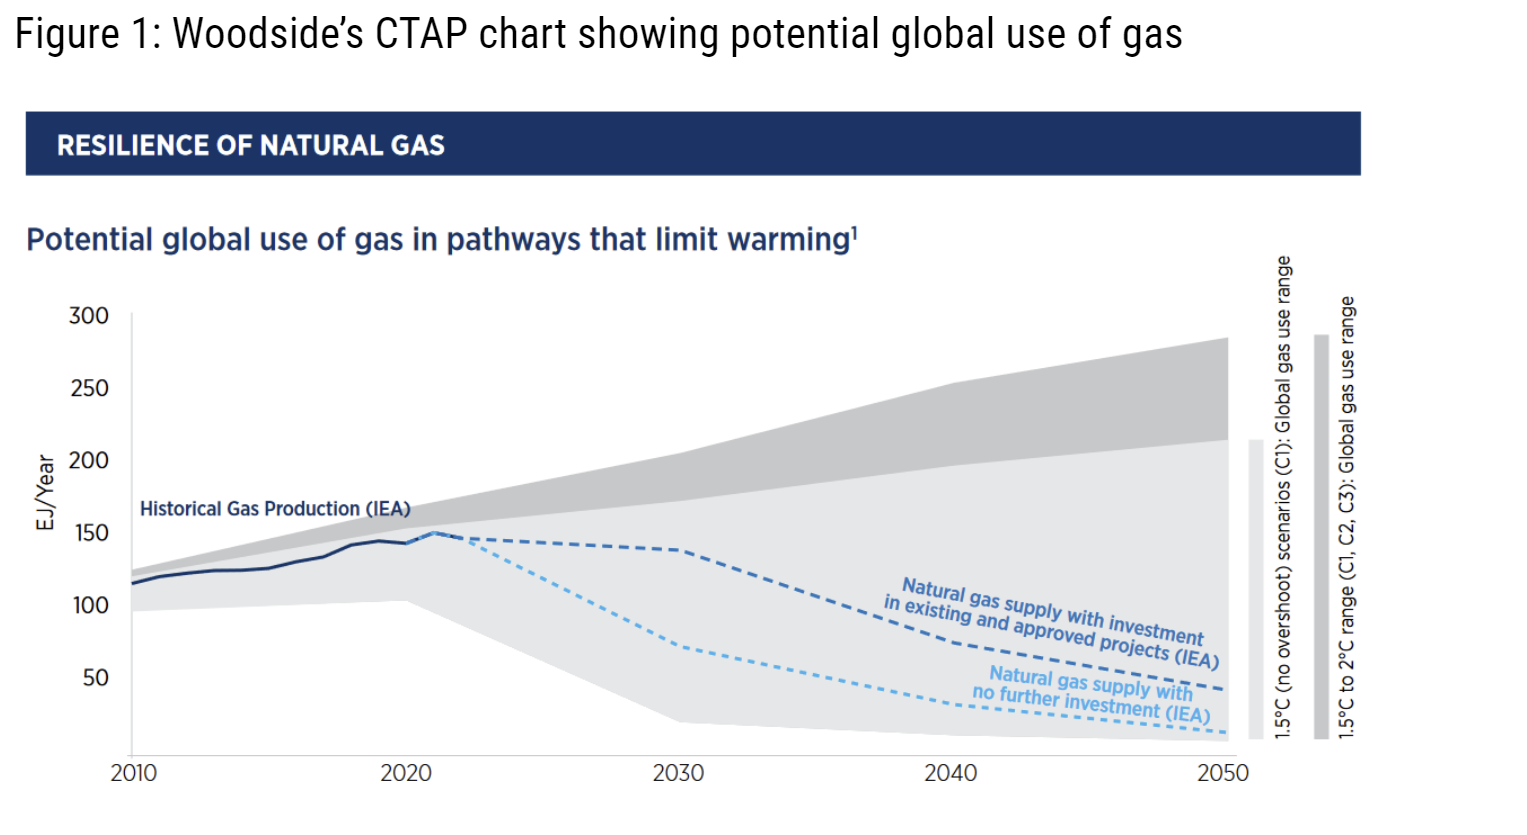 Woodside’s CTAP chart showing potential global use of gas